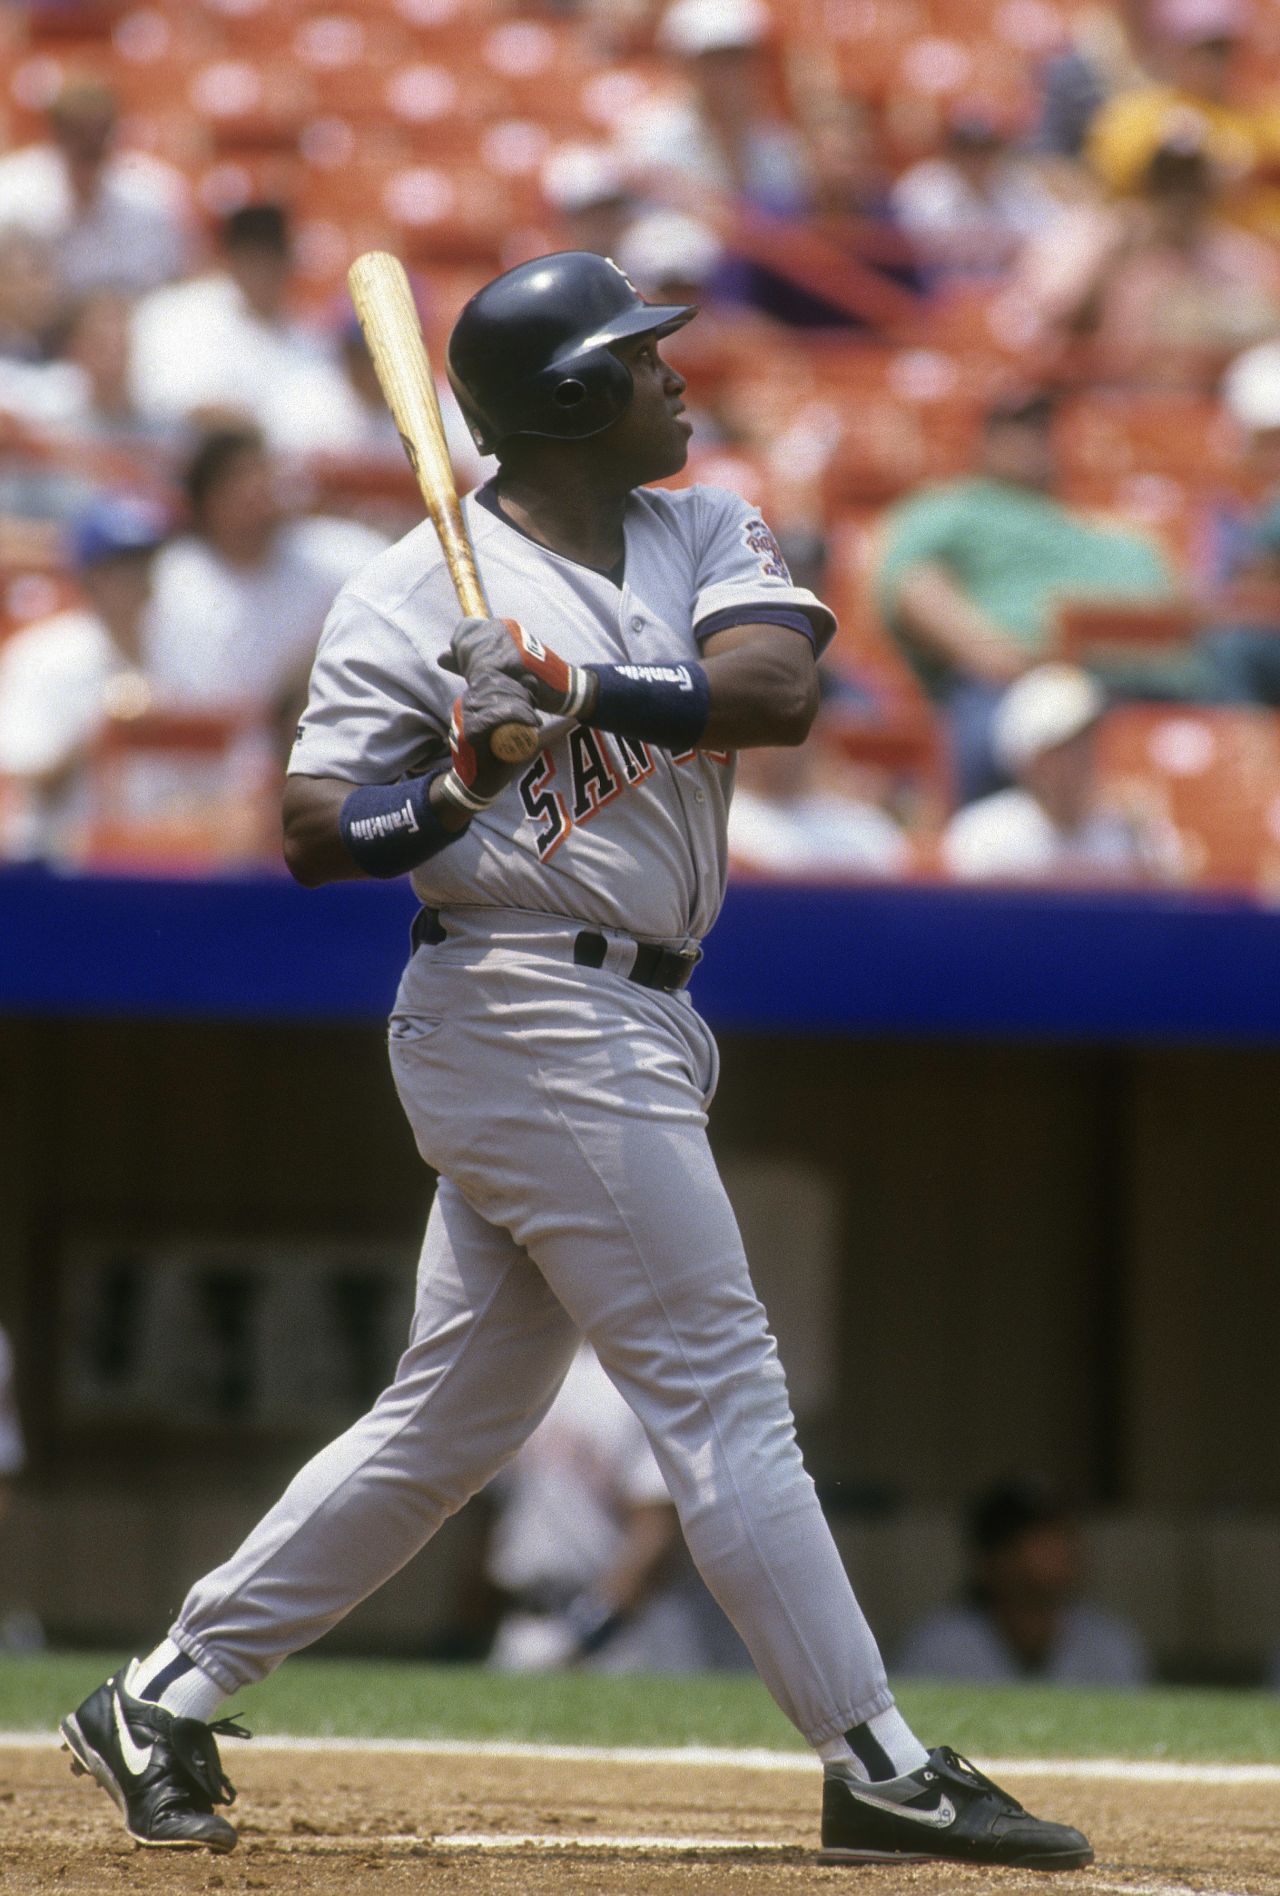 Gwynn watches the flight of a ball against the New York Mets in 1993. Gwynn finished his career with 3,141 career hits and a .338 batting average.